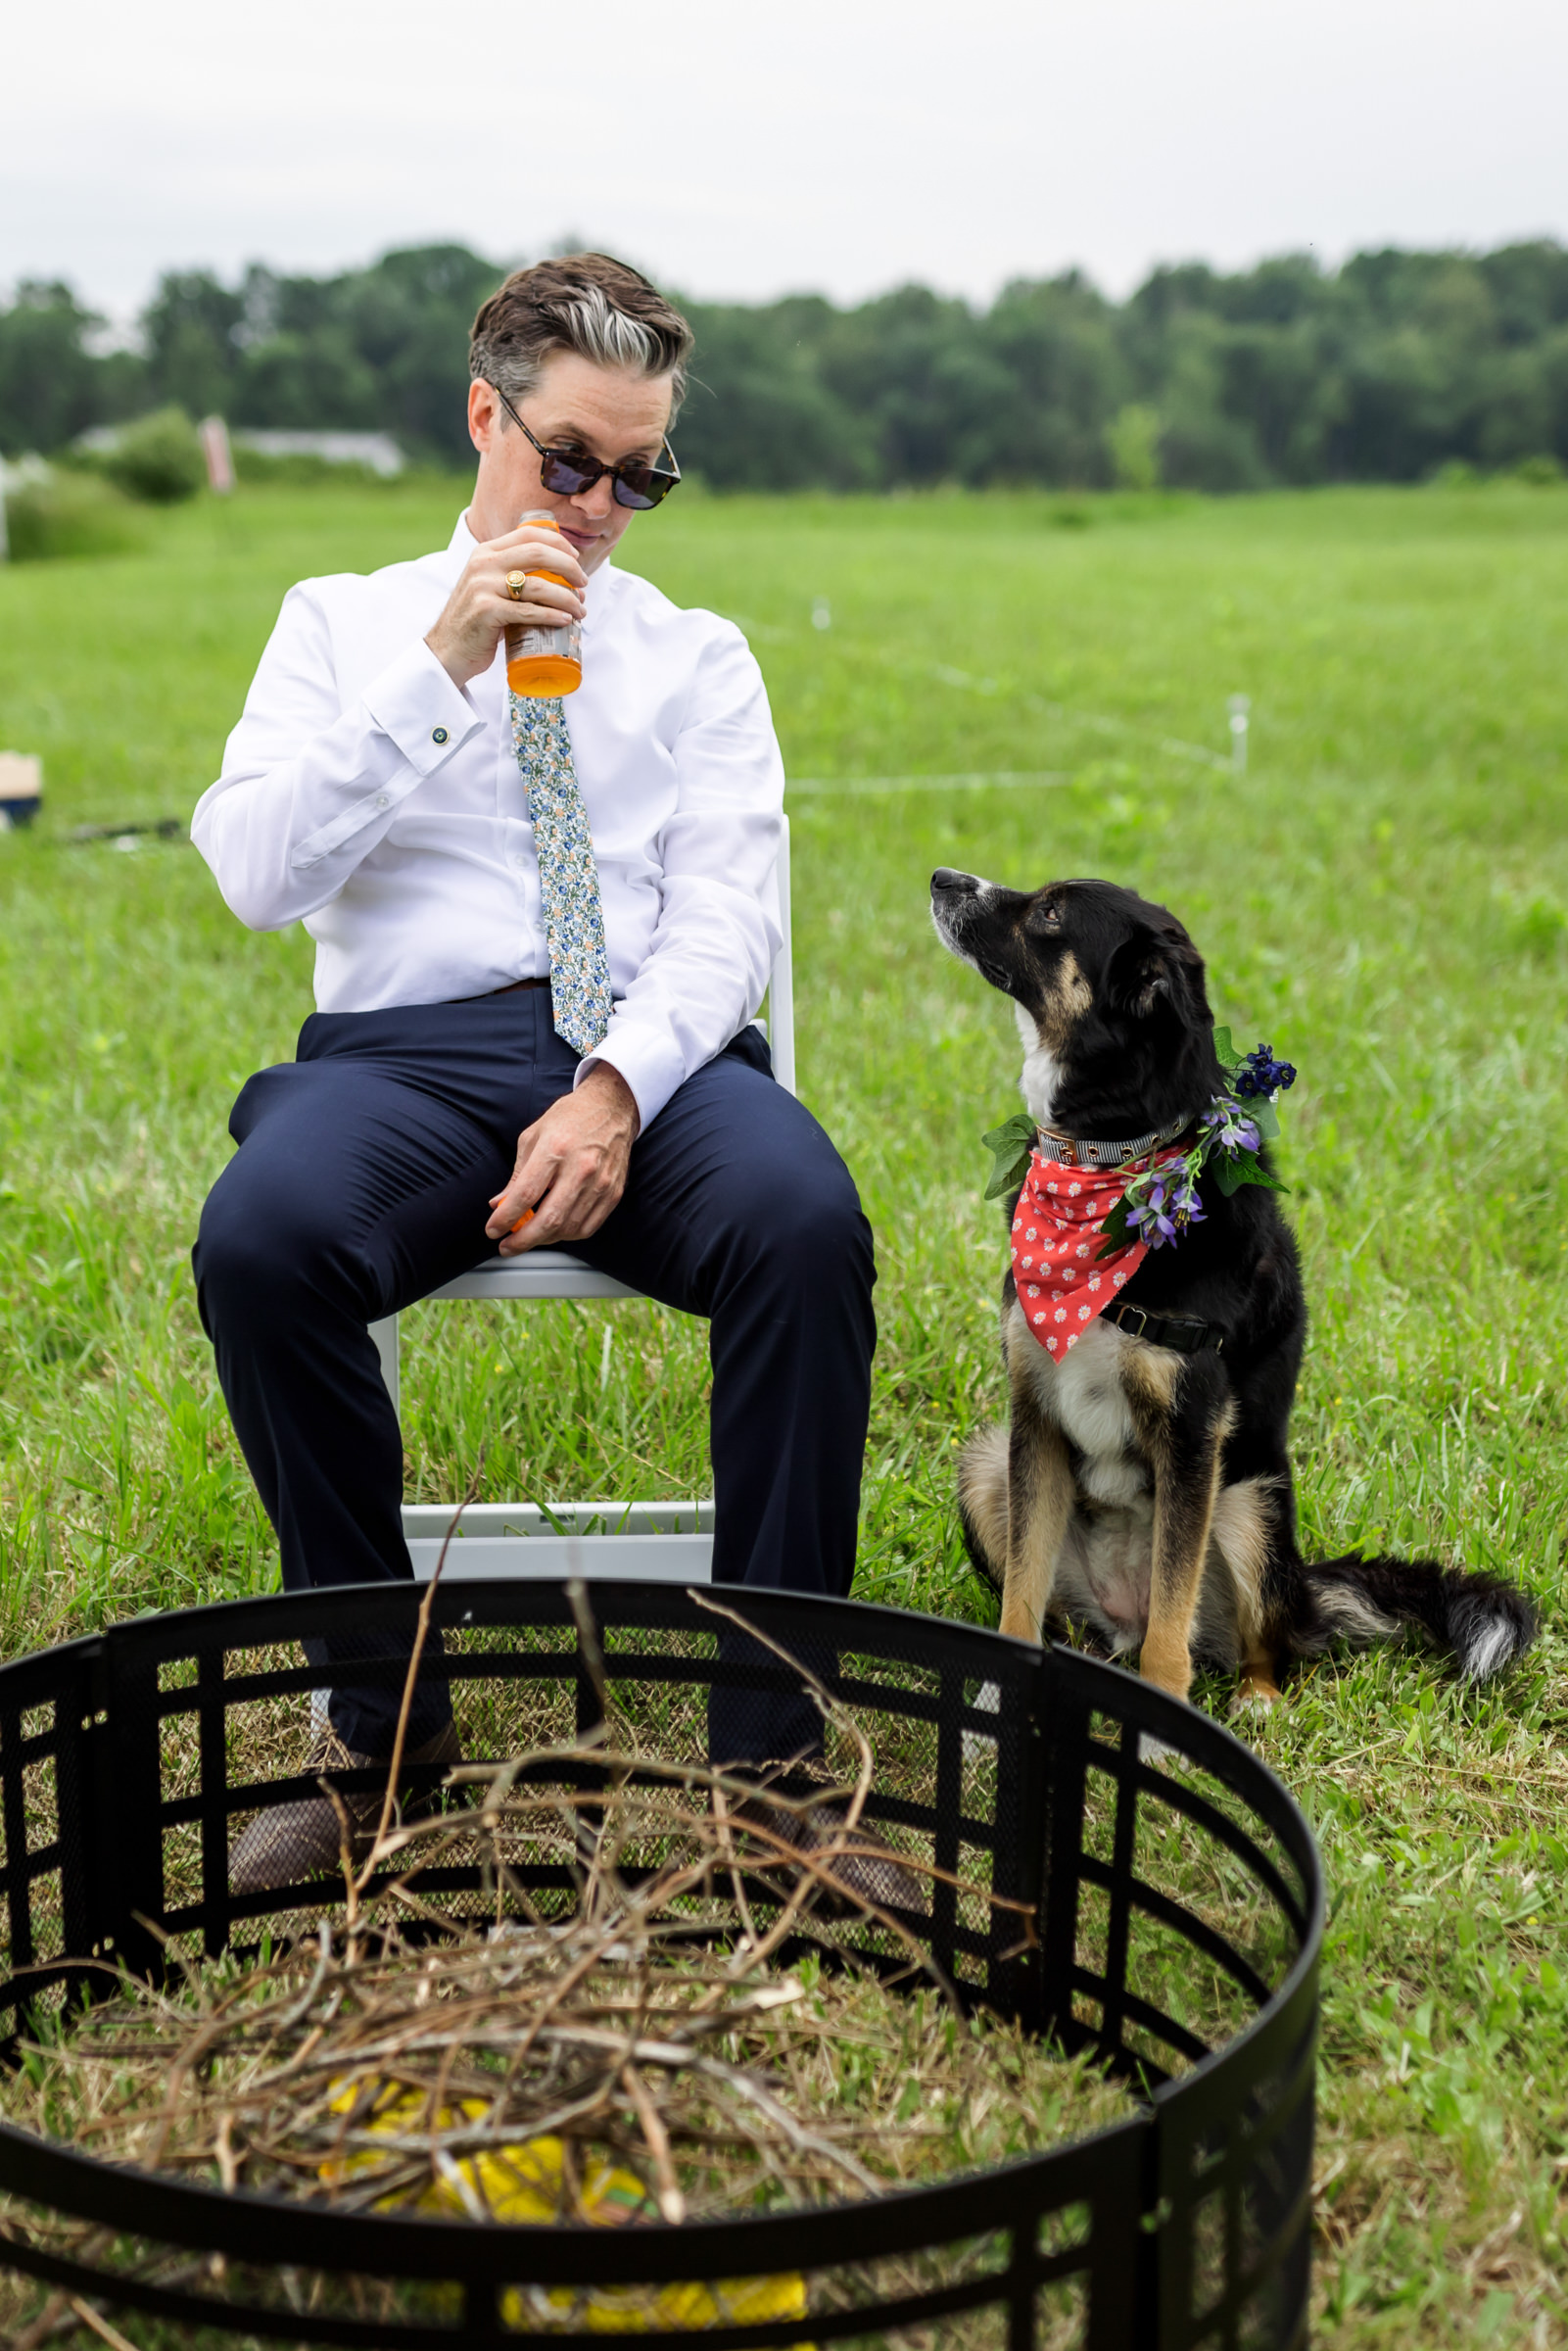 groom sitting with dog at outdoor wedding reception